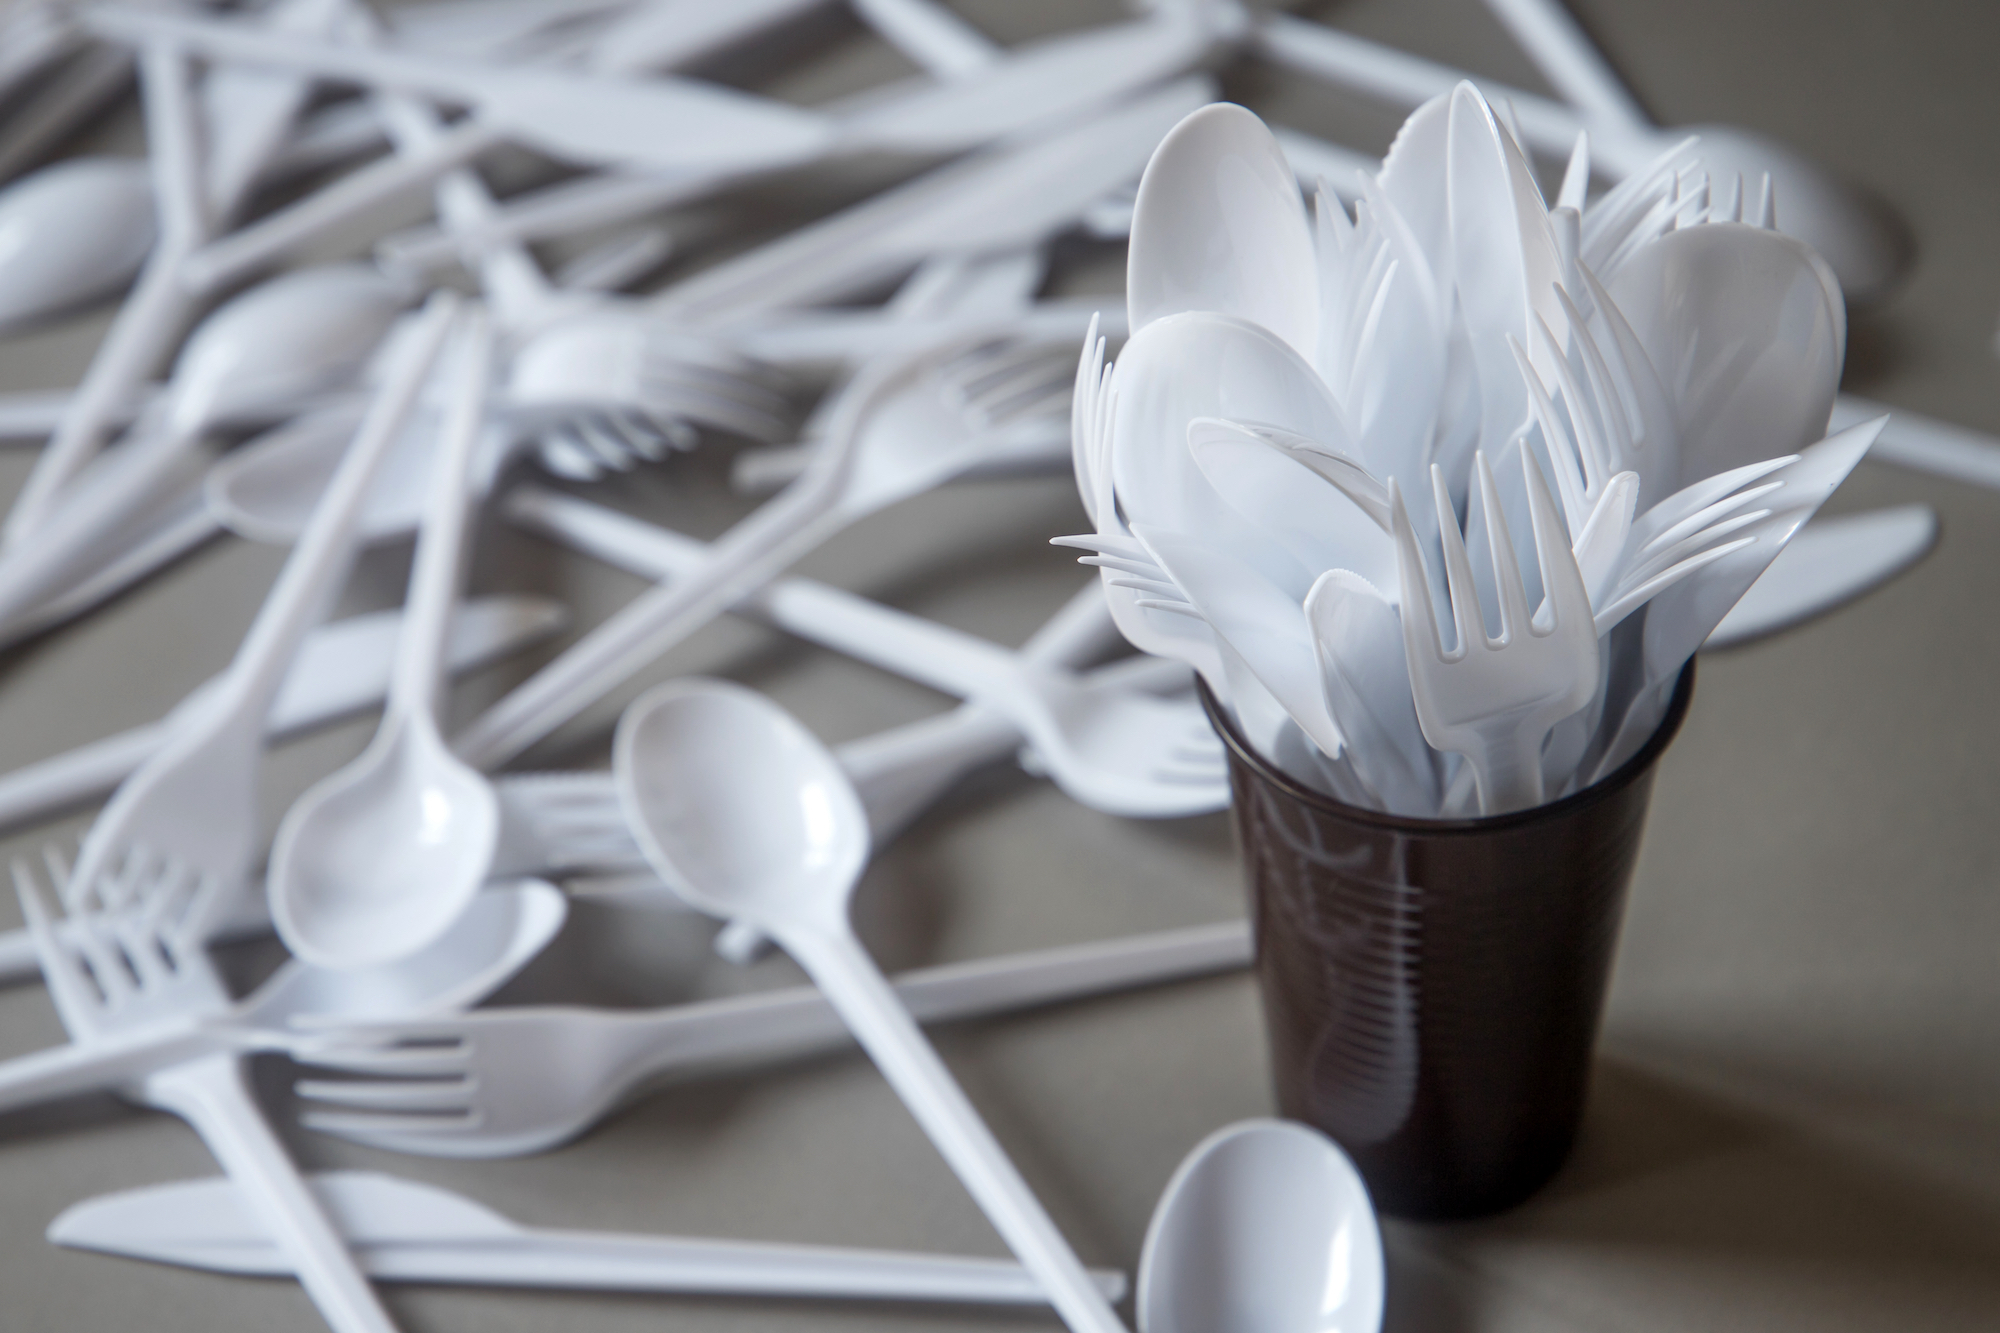 Importing disposable plastic cutlery banned from next year